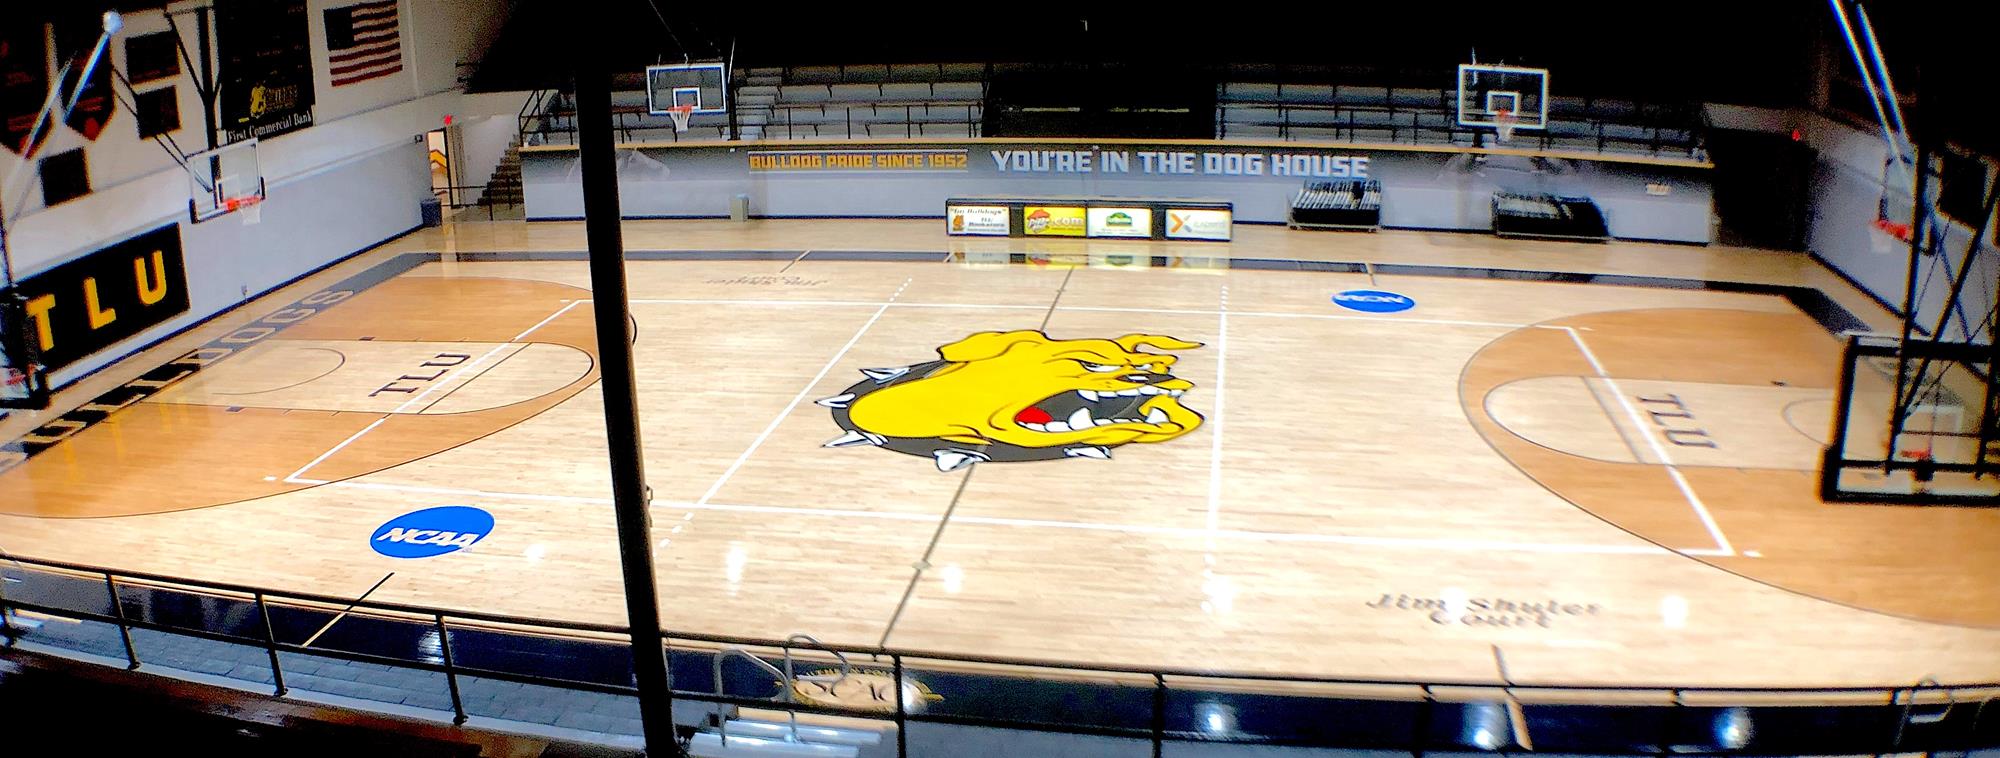 SCAC Basketball Championships come to the Doghouse Friday-Sunday